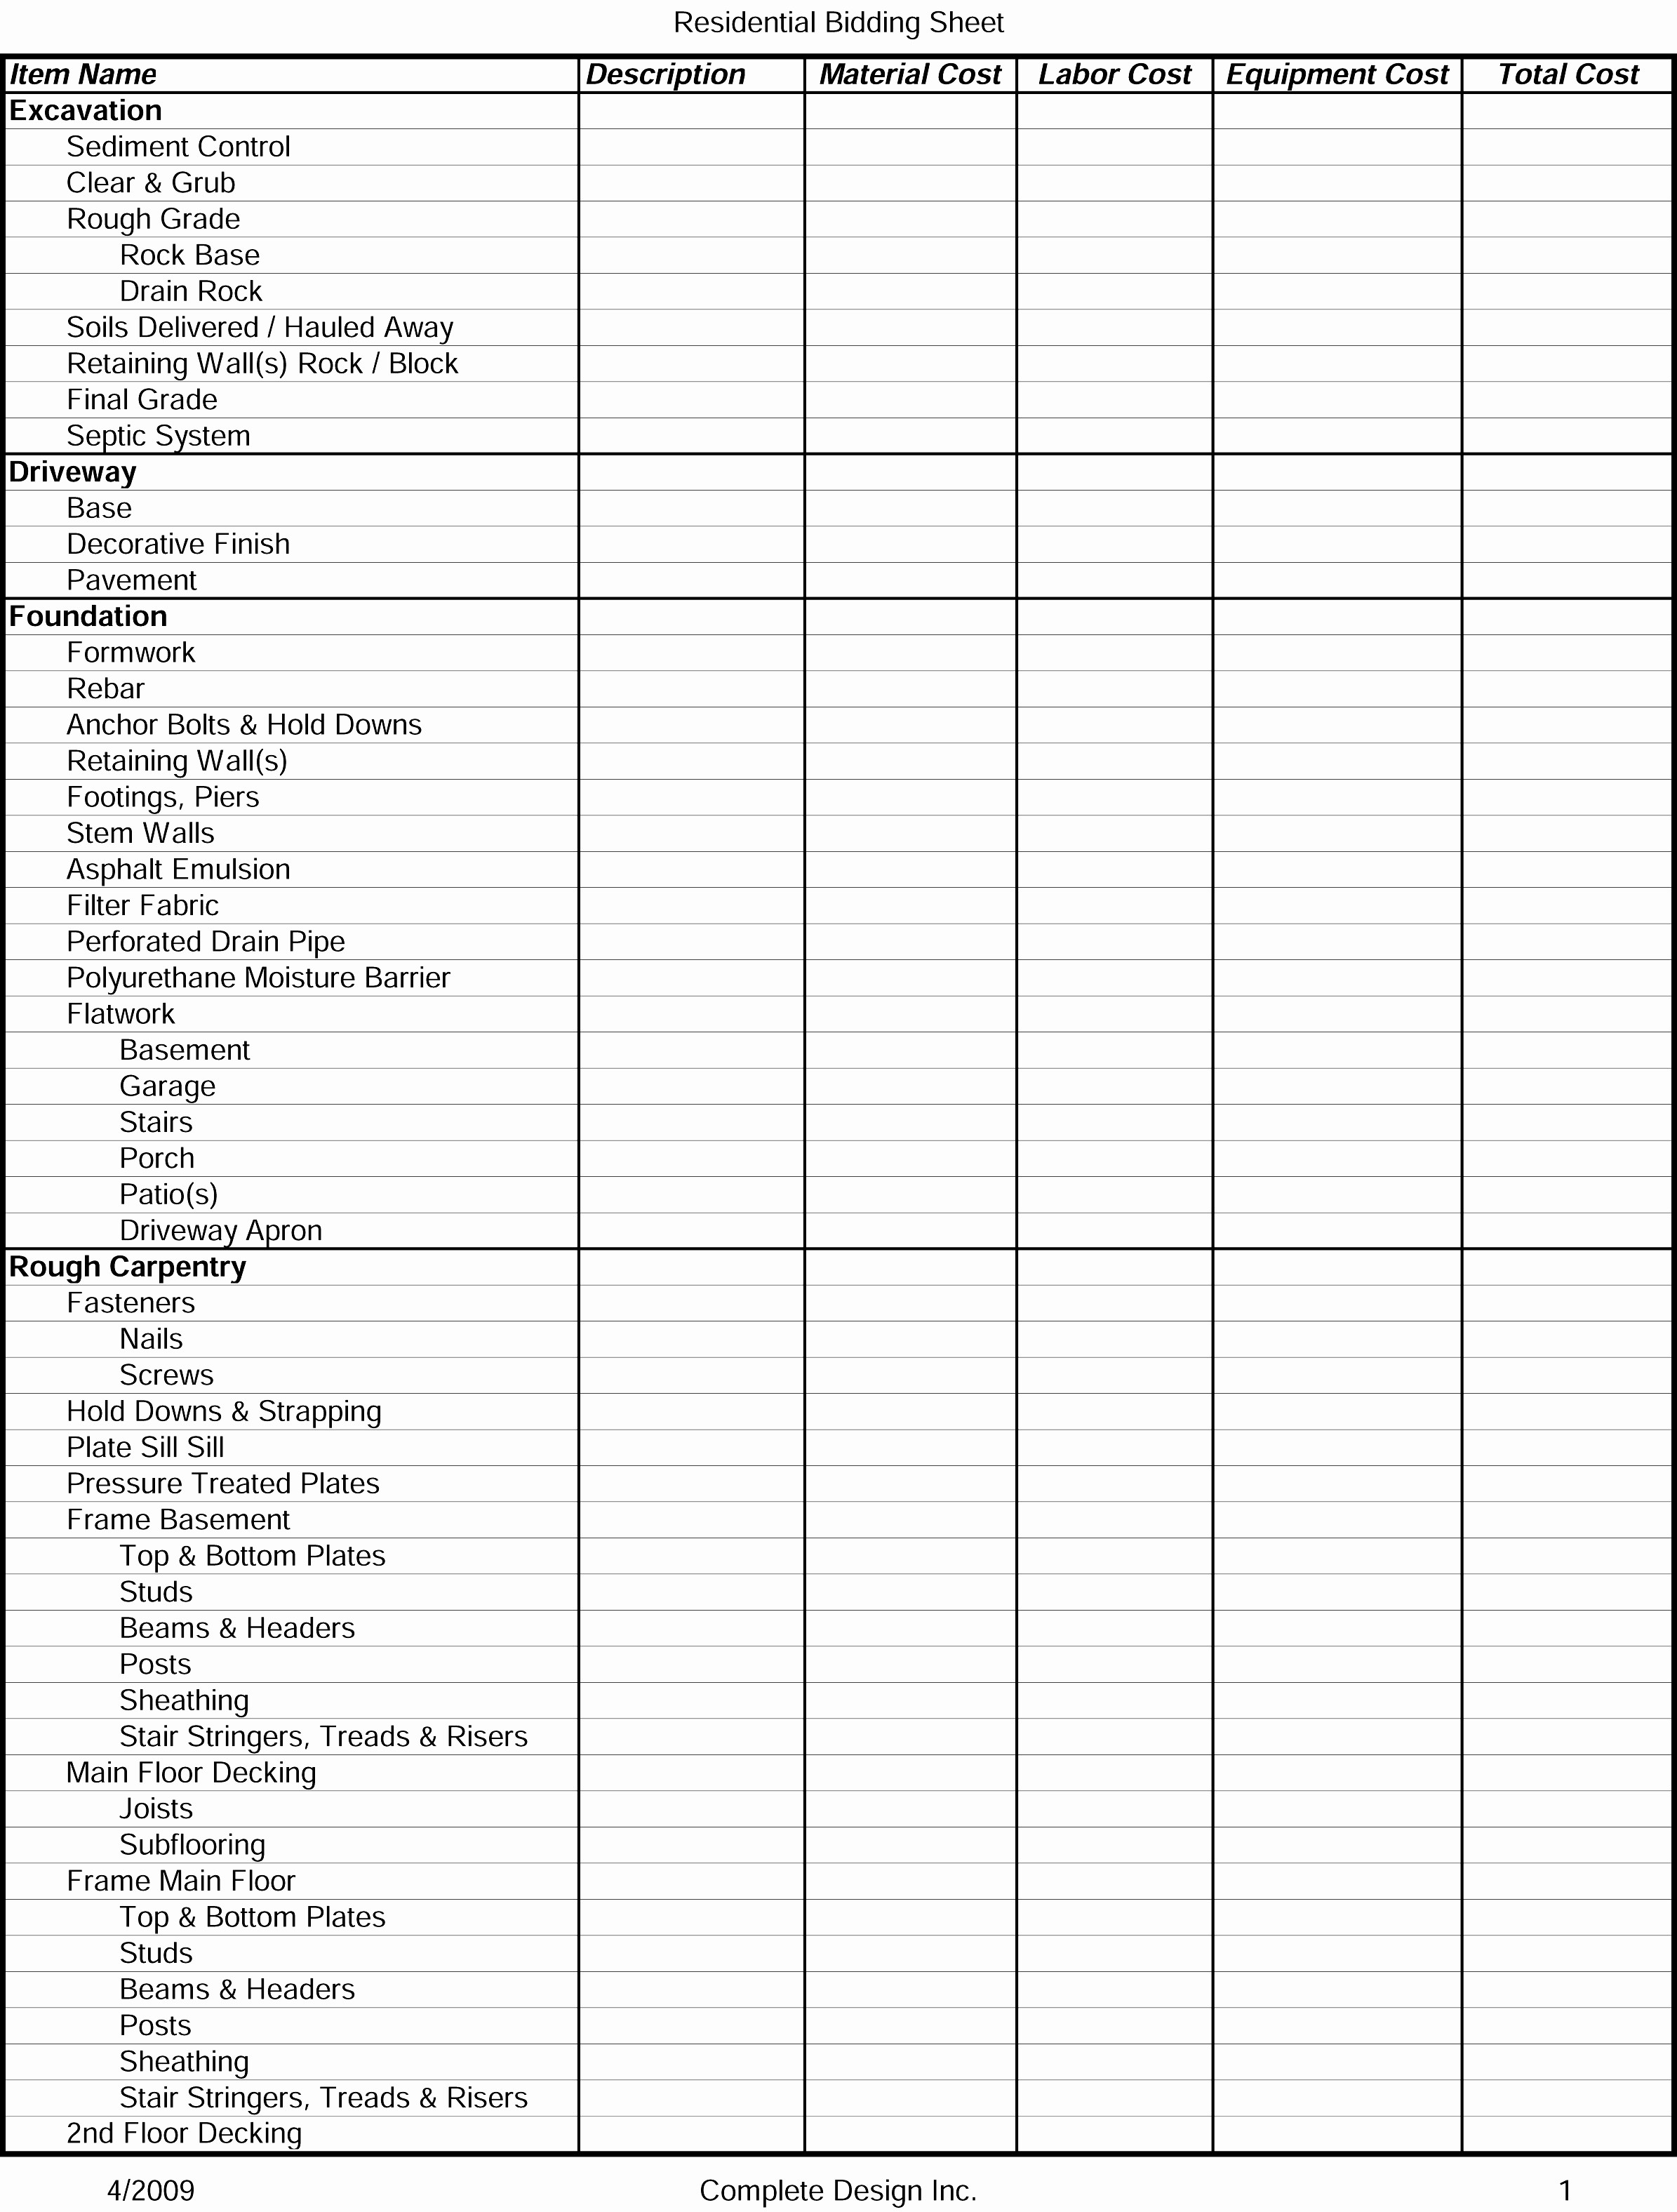 50 Awesome Enemy Of Debt Spreadsheet DOCUMENTS IDEAS Document